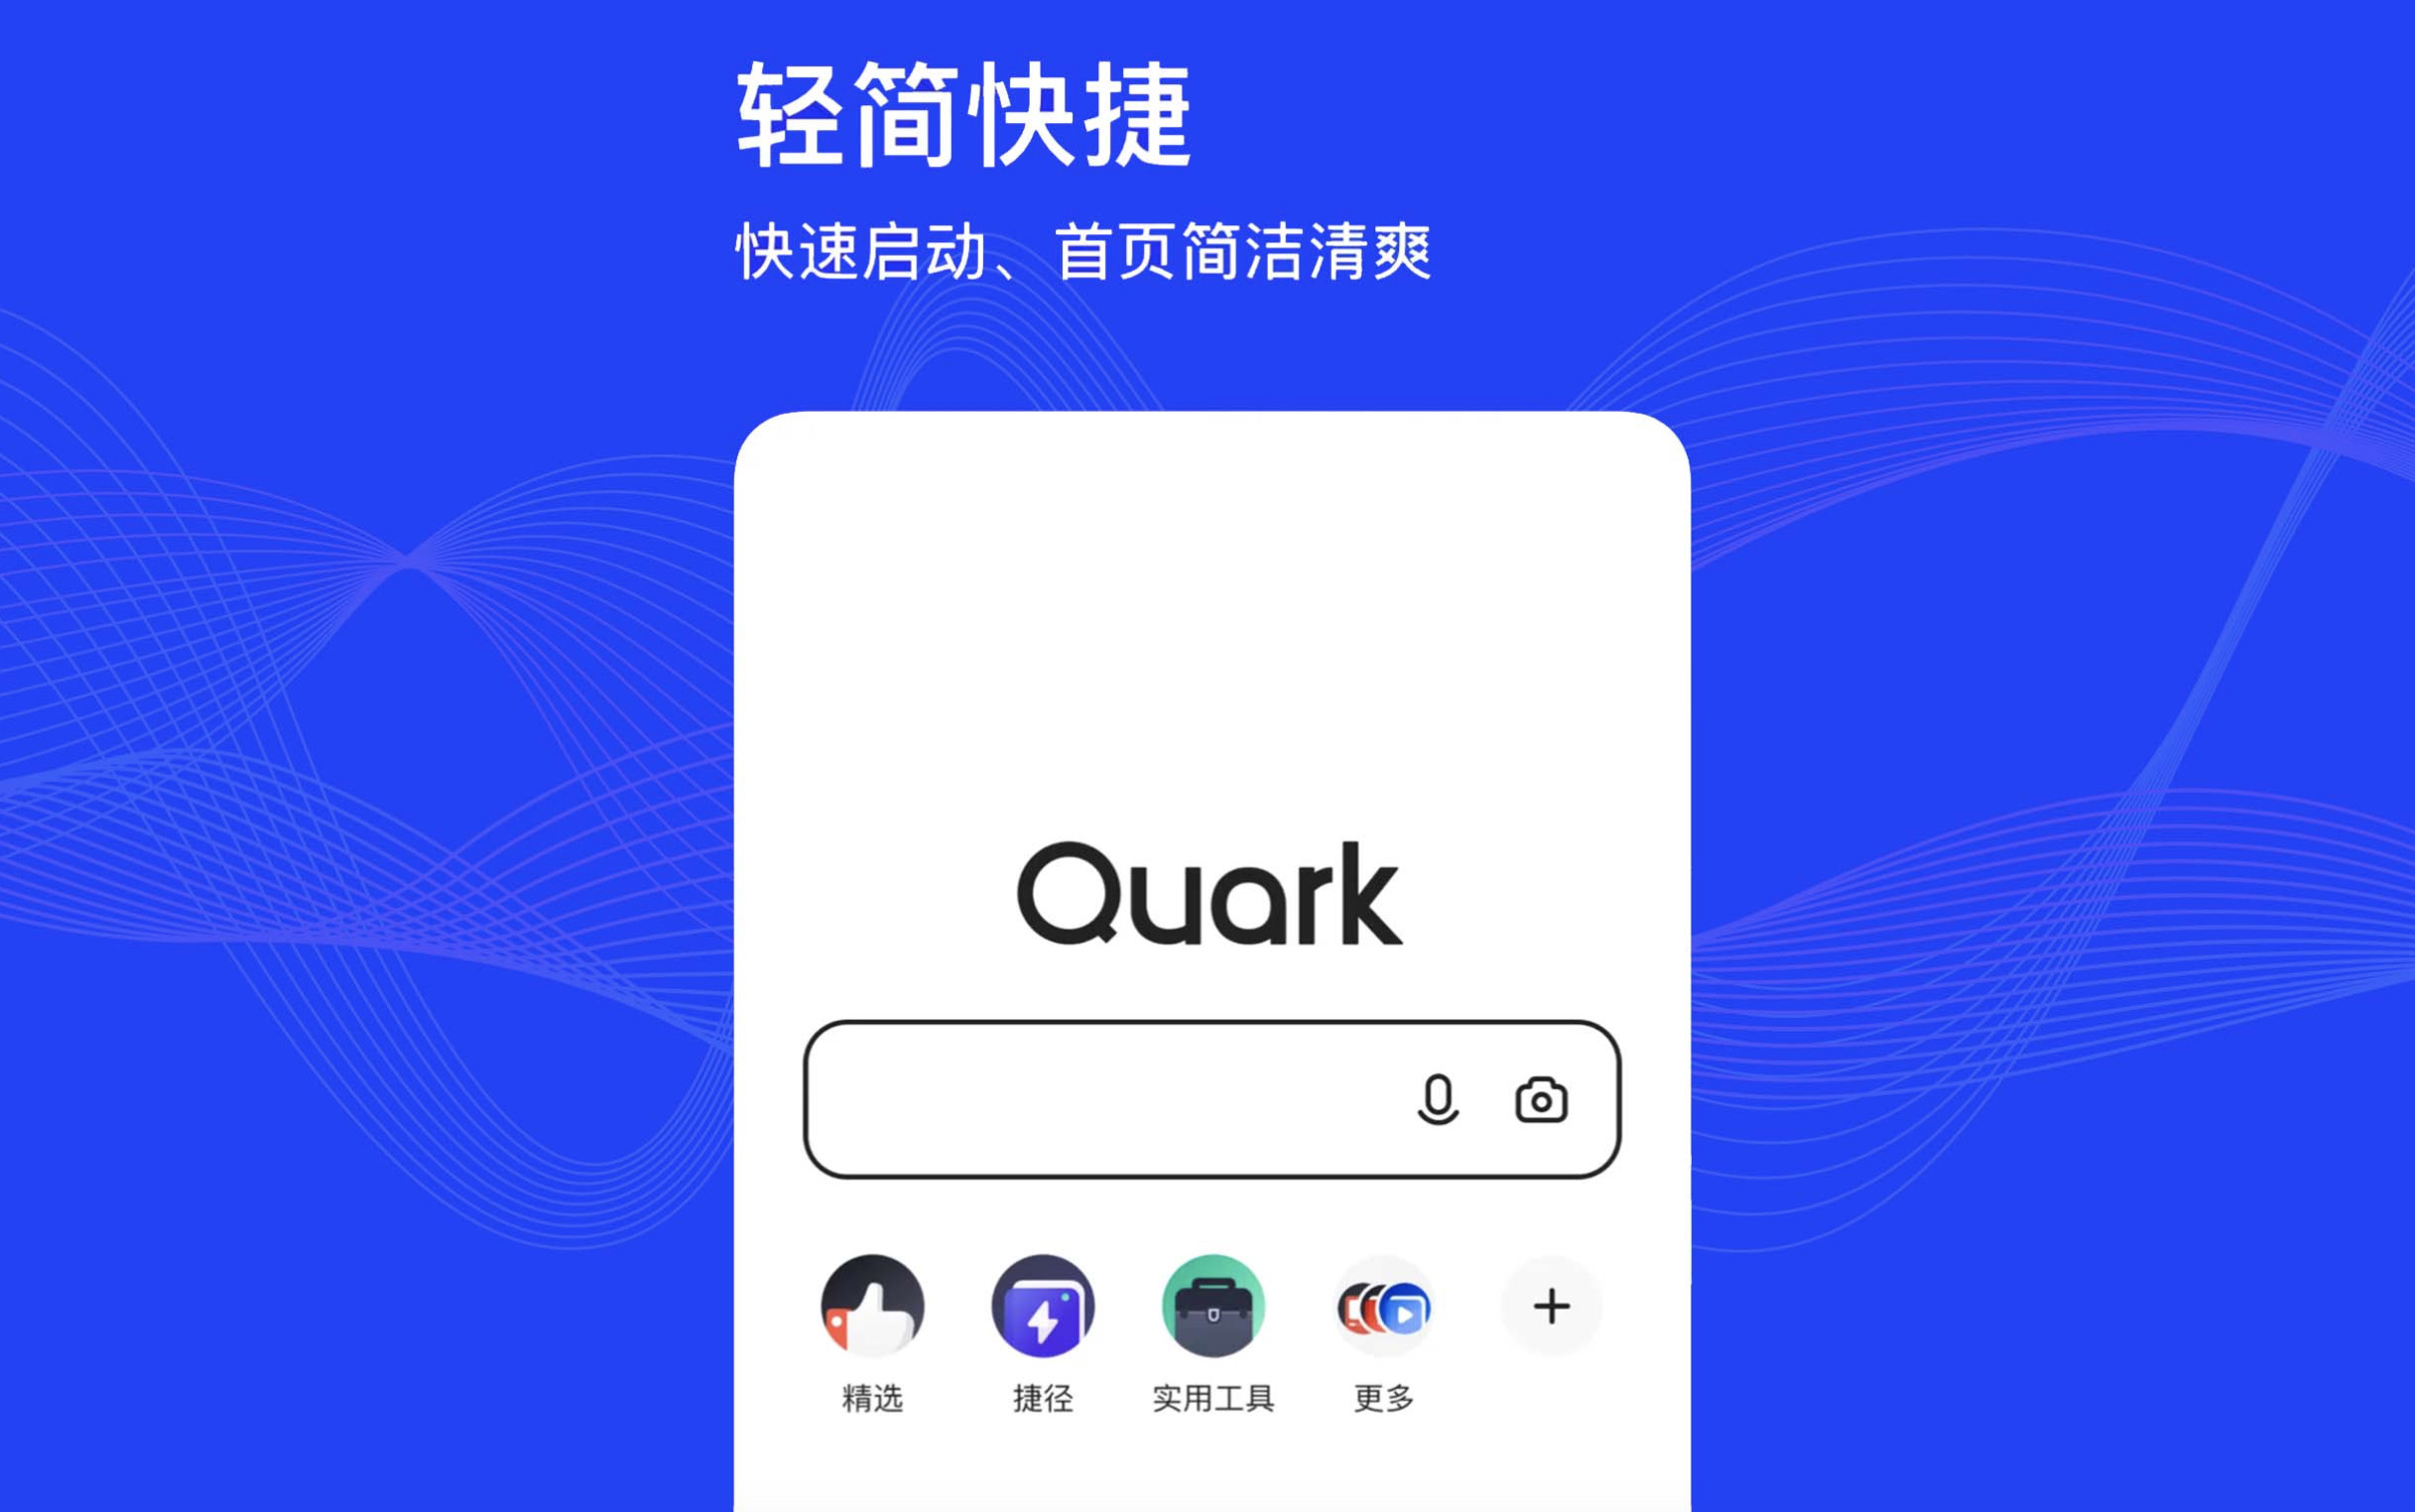 Quark is Alibaba Group Holding’s web search and cloud storage platform. Photo: Handout 